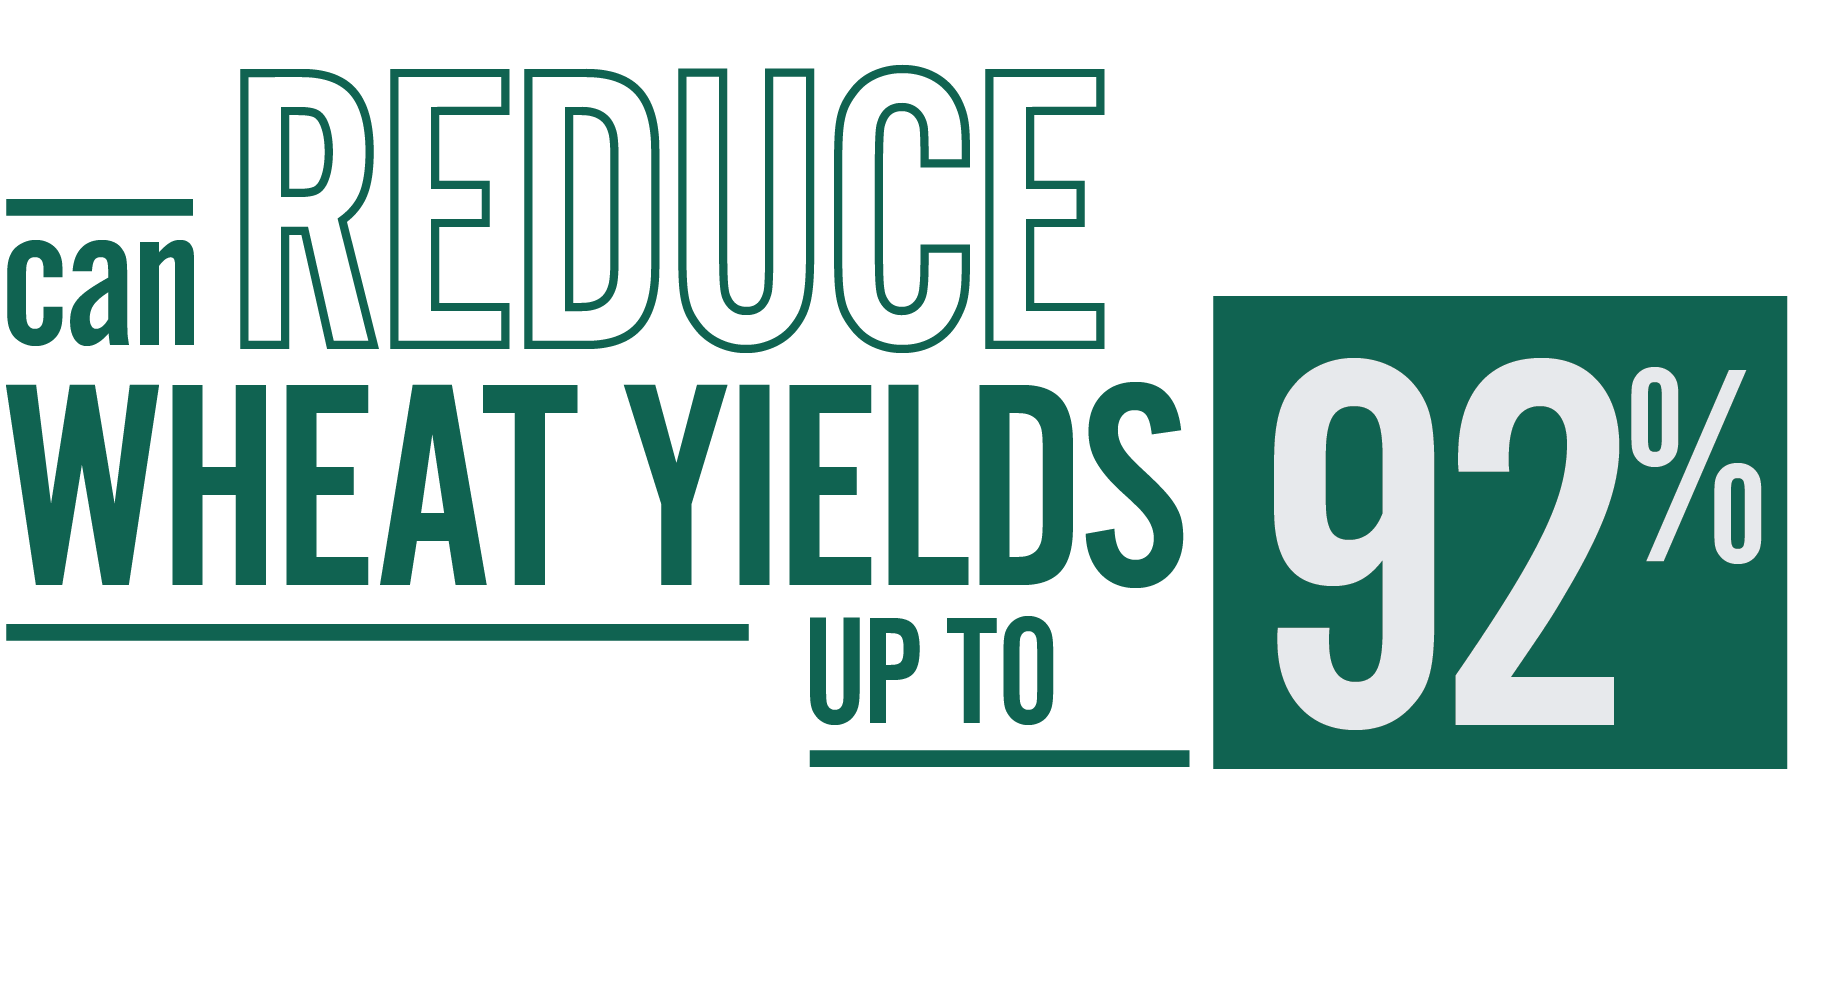 Can reduce wheat yields up to 92%